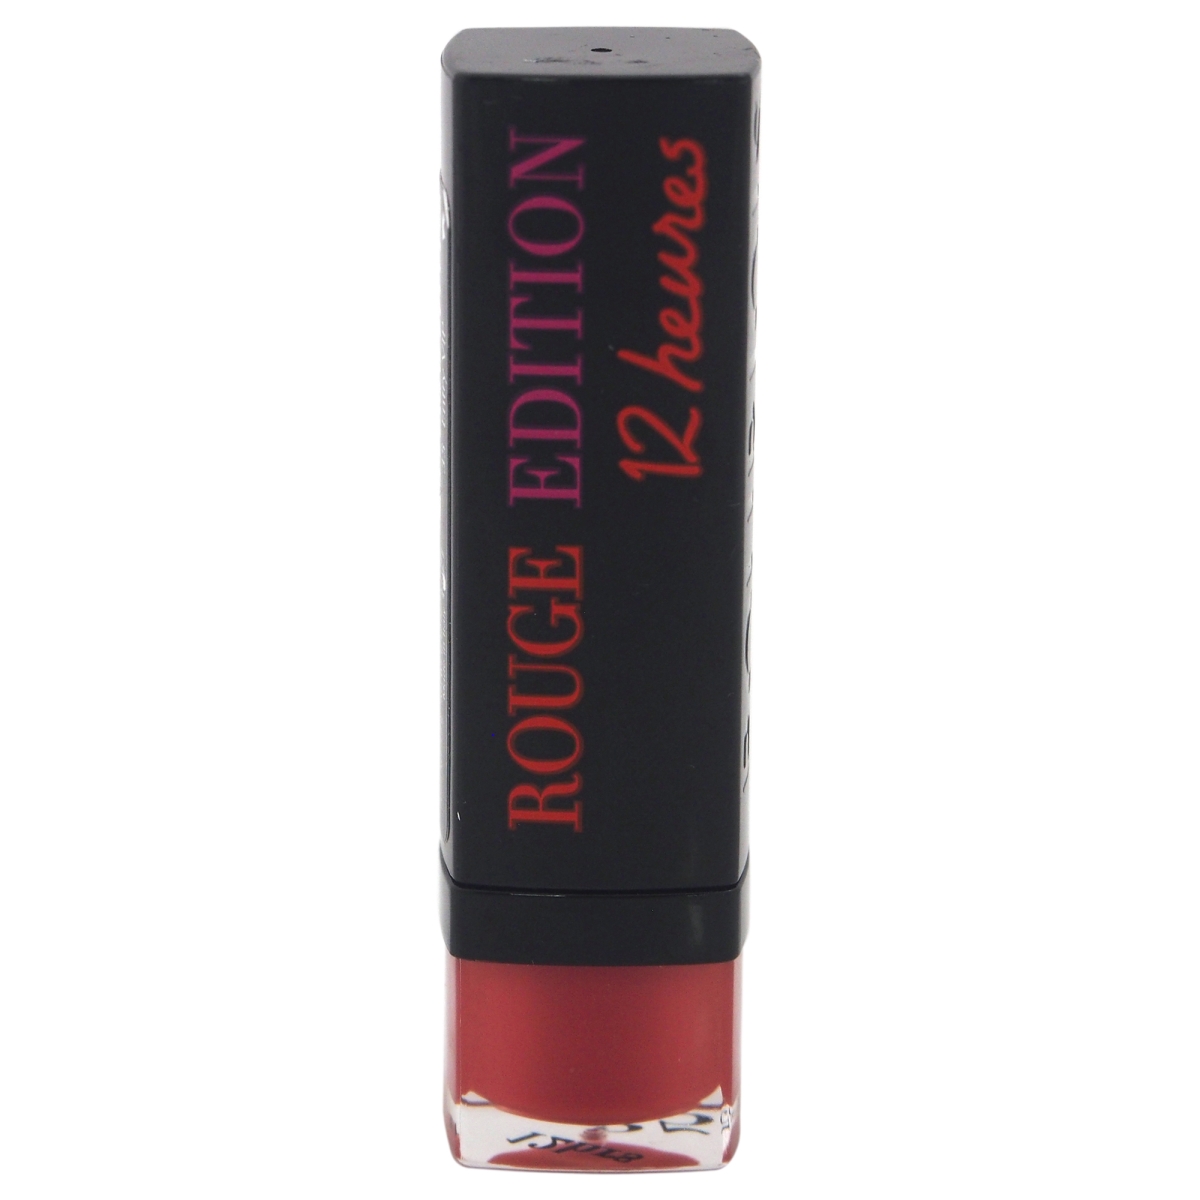 W-c-9707 0.12 Oz No. 35 Rouge Edition 12 Hours Entry Vip Lipstick For Women